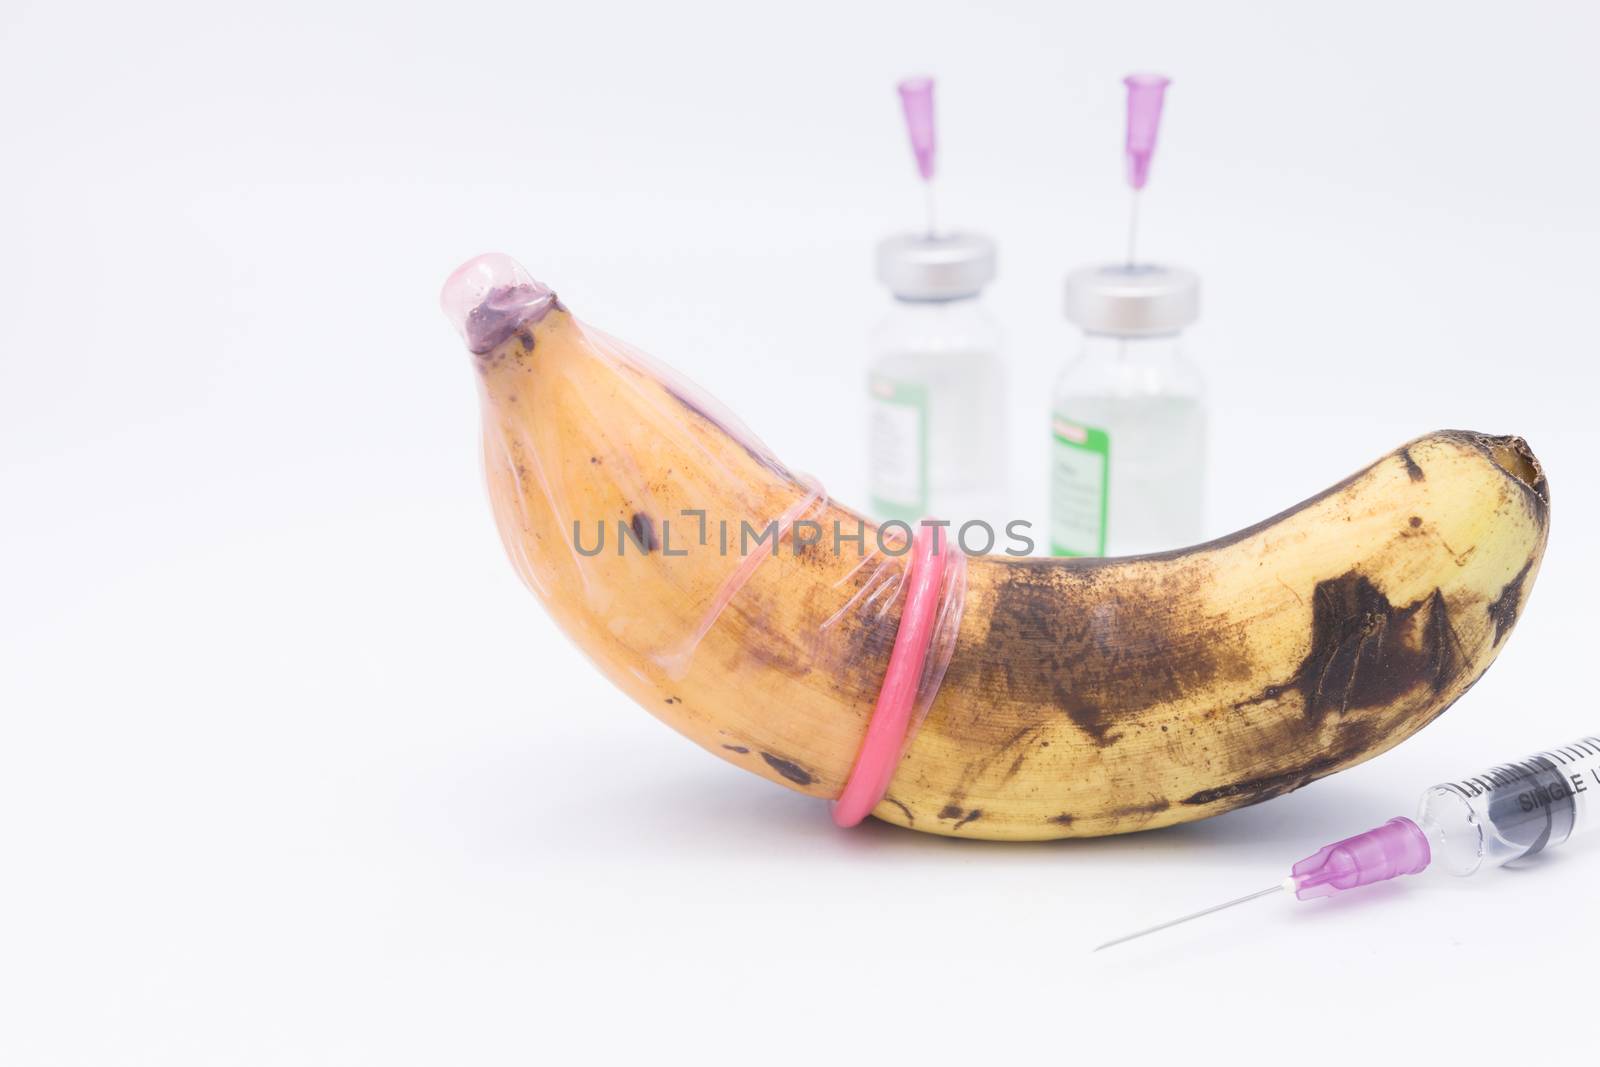 rotten banana in condom,sexually transmitted disease concept by frank600